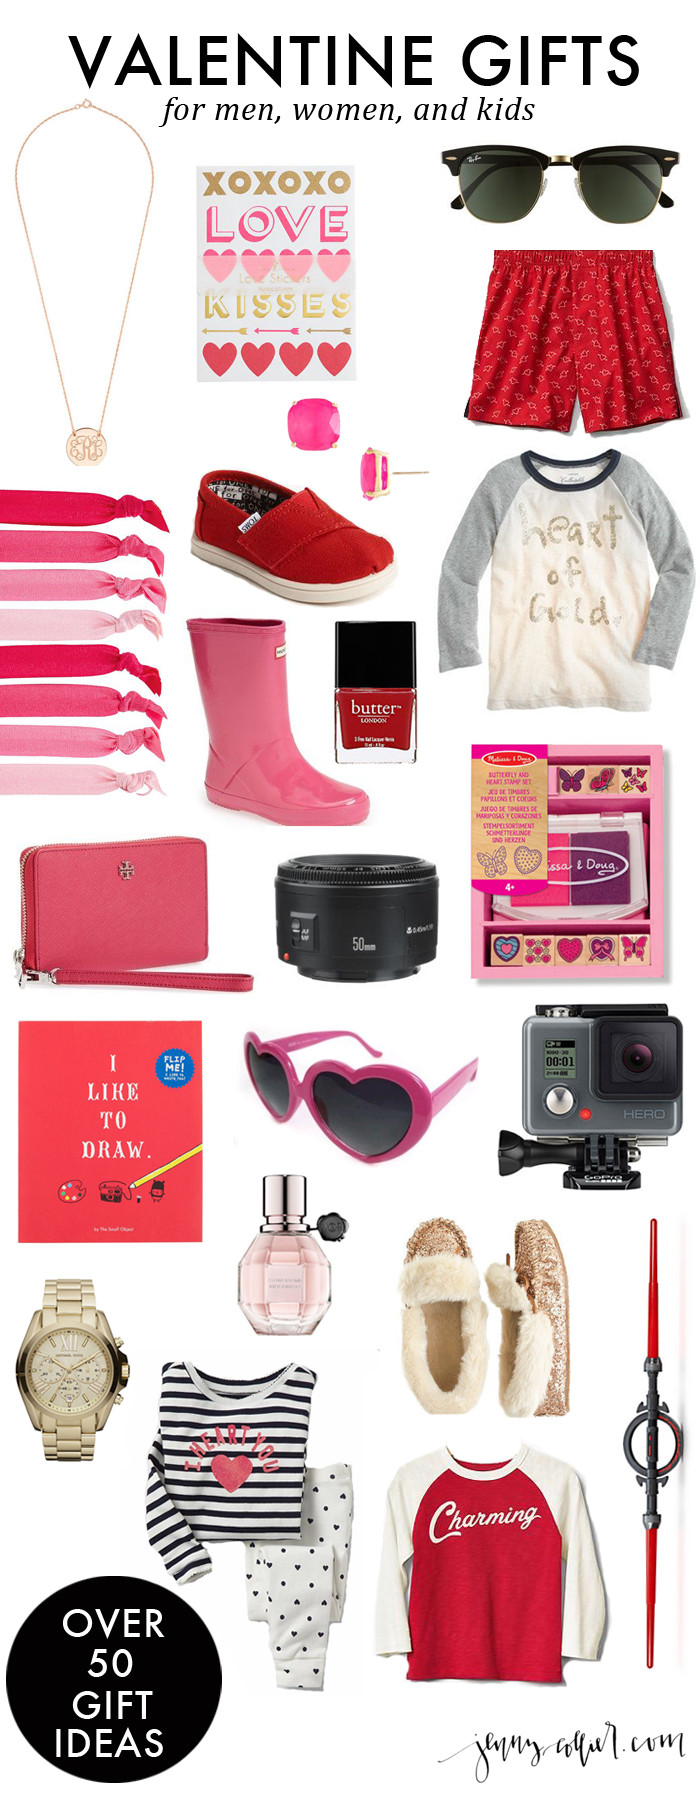 Valentine Gift Ideas For Women
 Valentine Gifts for Men Women and Kids jenny collier blog